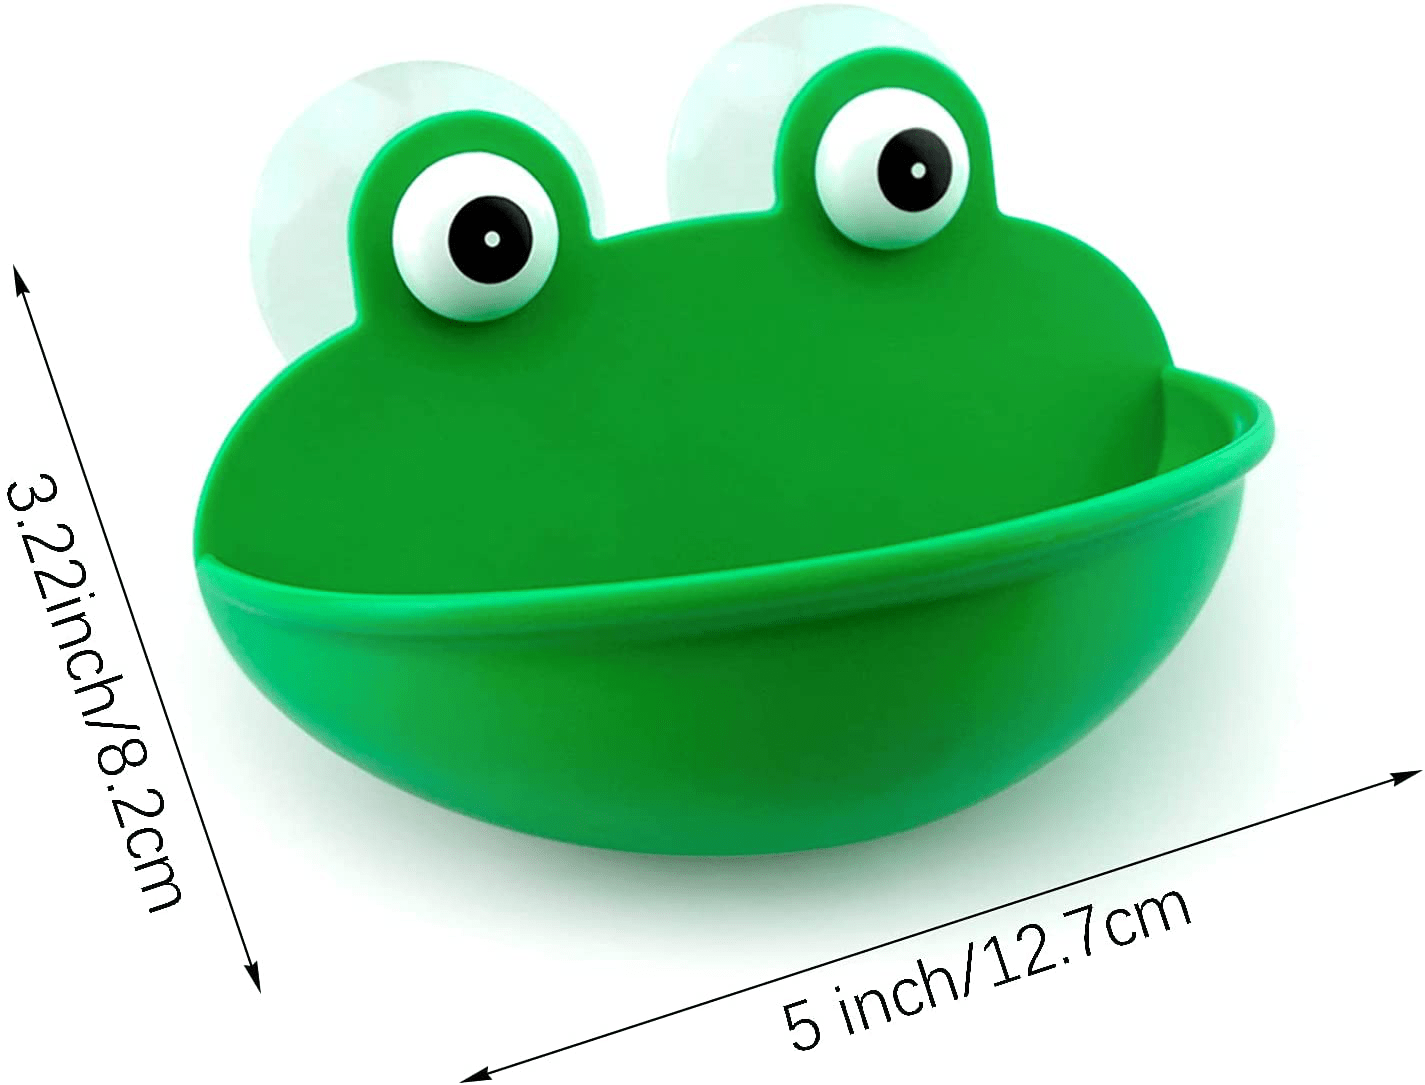 2 Pack Amphibious Aquatic Frog Habitat with Sucker,Cute Aquarium Wall-Mounted Decoration for Frog Toad Lizard Gecko Tortoise and Other Small Aquatic Animals